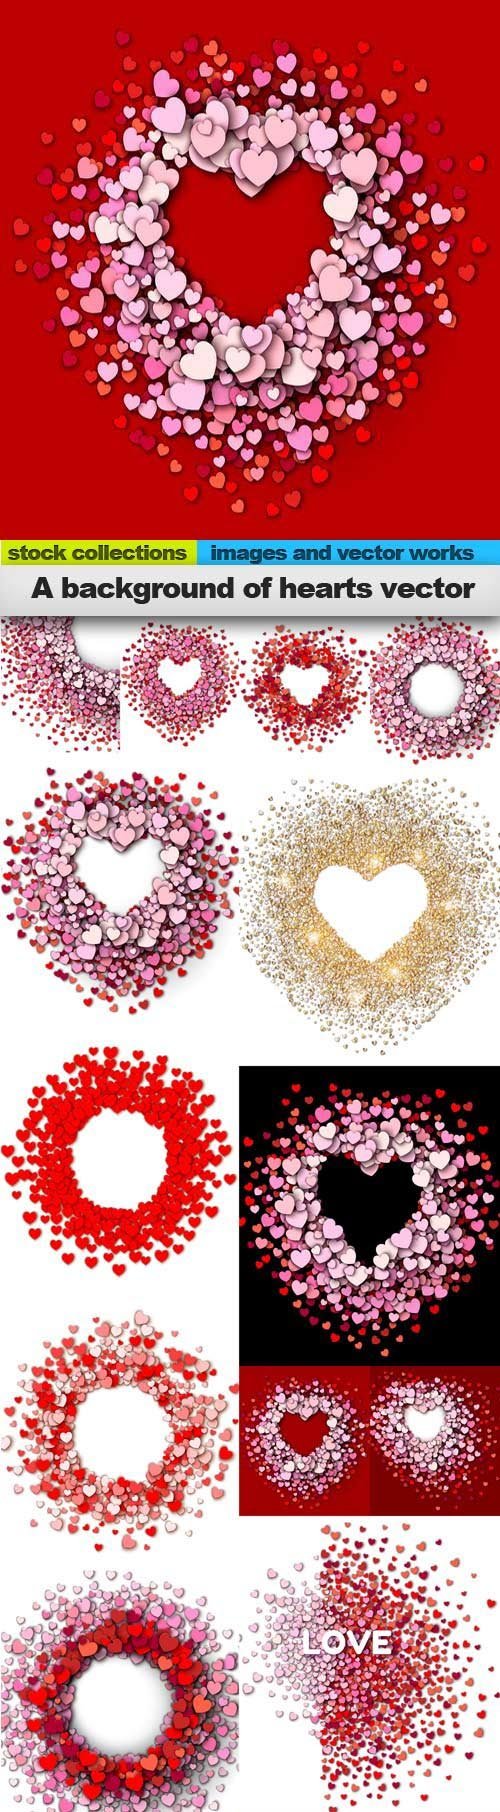 A background of hearts vector, 15 x EPS